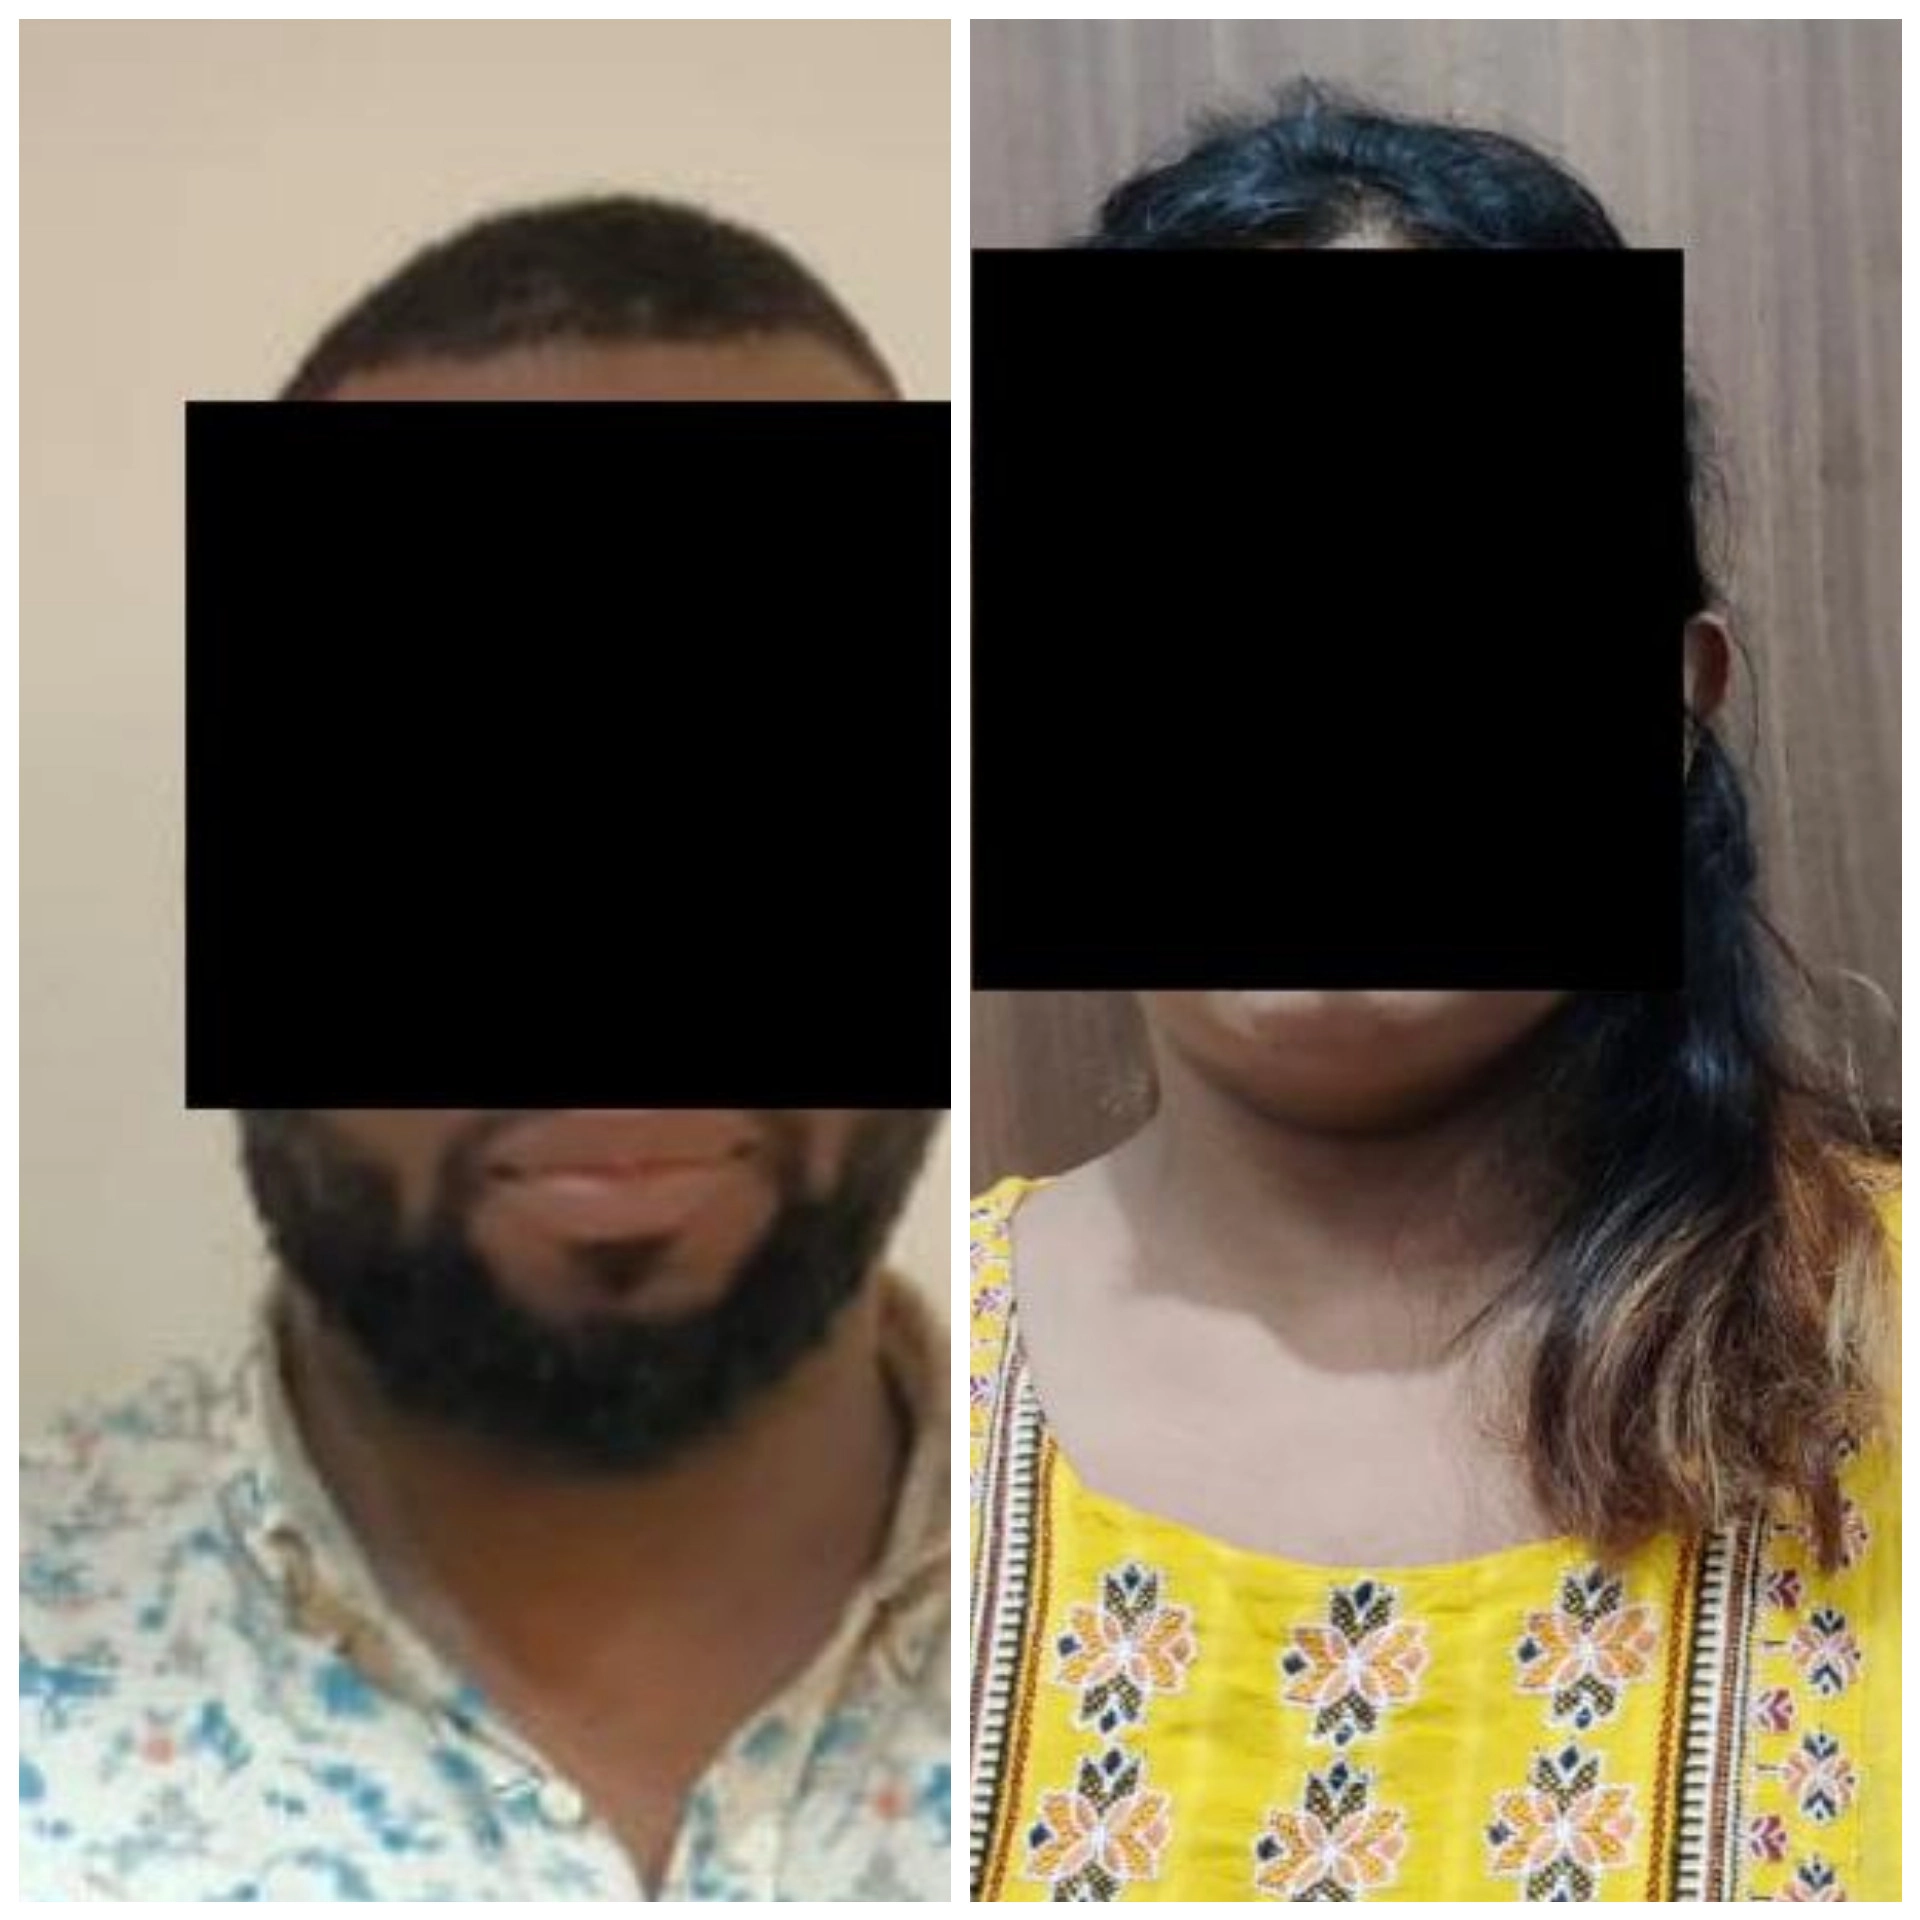 A Nigerian national and his Indian girlfriend have been arrested for allegedly duping businessman of N54m, A Nigerian national and his Indian girlfriend have been arrested for allegedly duping businessman of N54m, INFINITY LOADED